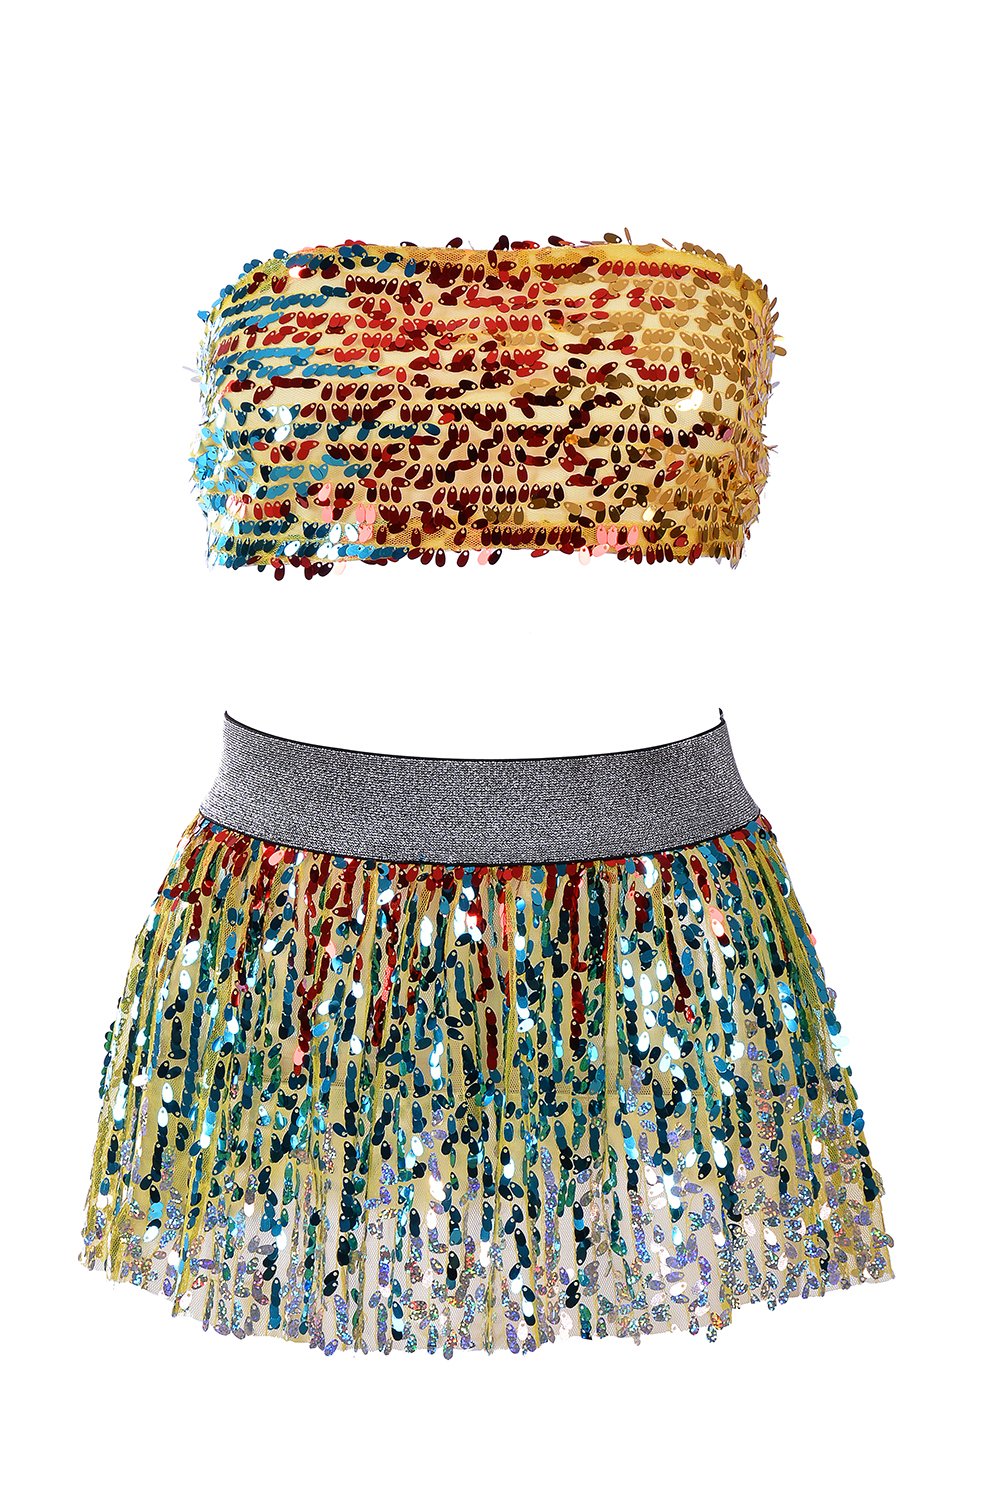 Palace Queen Sequin Set (Tube Top + Skirt)